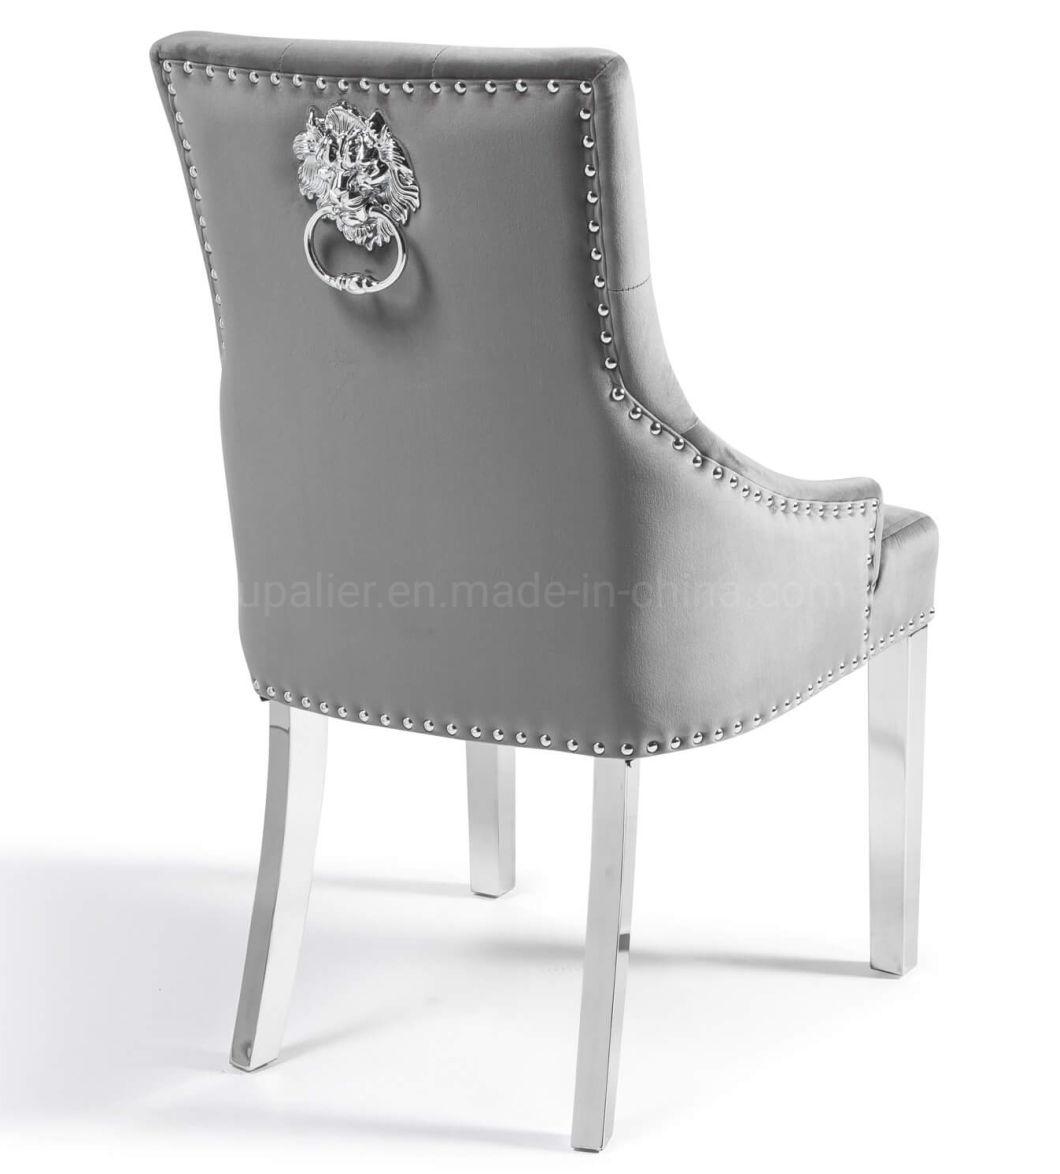 China Wholesale High Quality Hot Sale High Back Dining Chair